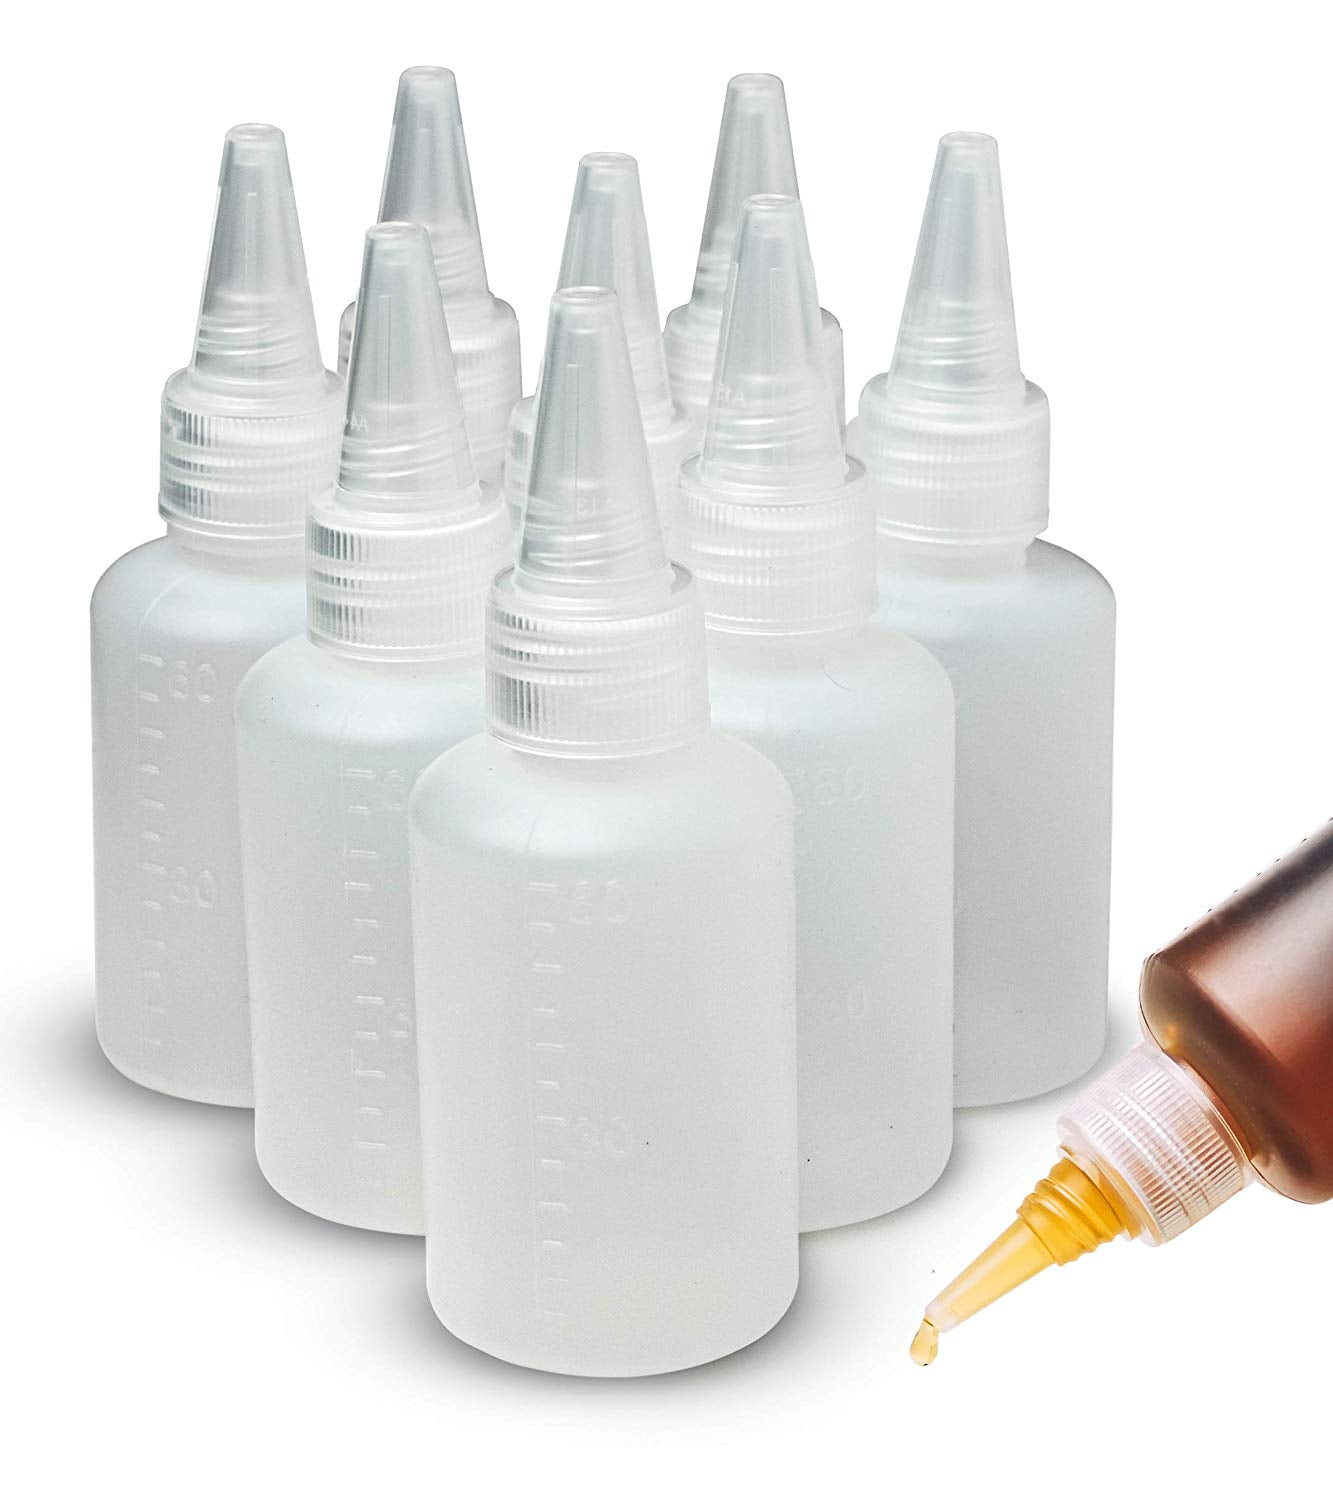 Bastex 13 Pack 4 Ounce Plastic Squeeze Bottles with Caps and Measurements. Small Mini Squeeze Bottle for Arts and Crafts, Paint, Icing, Liquids